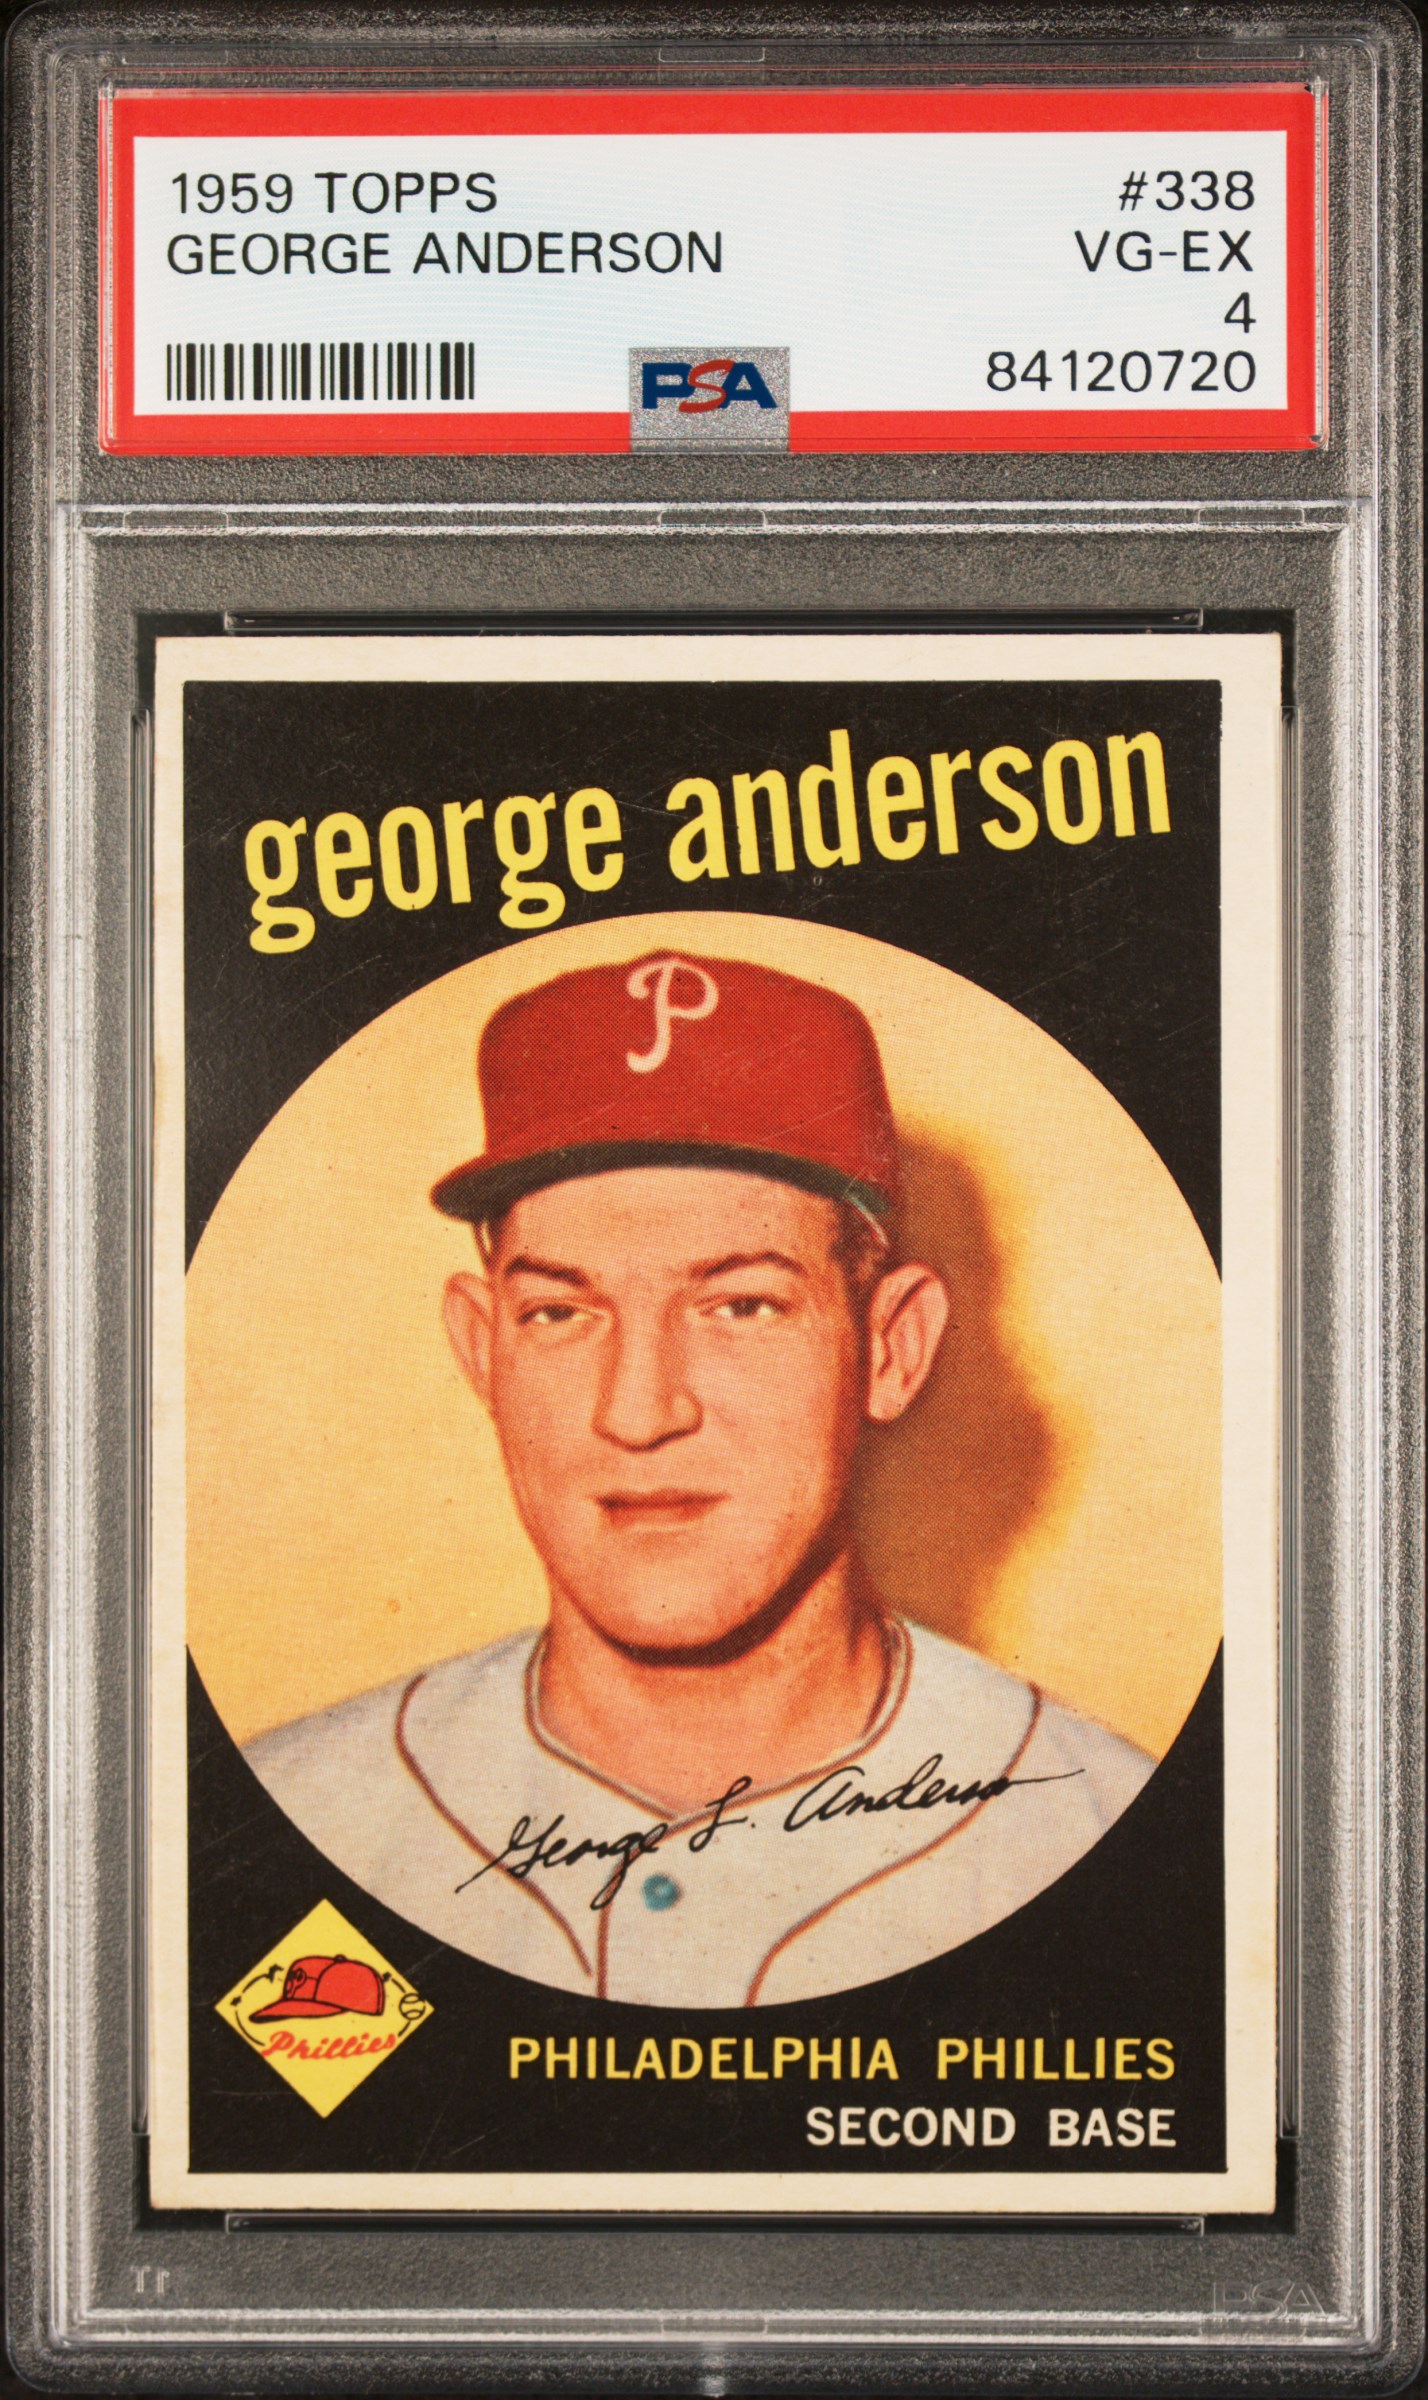 1959 Topps #338 George (Sparky) Anderson Rookie Card - PSA VG-EX 4